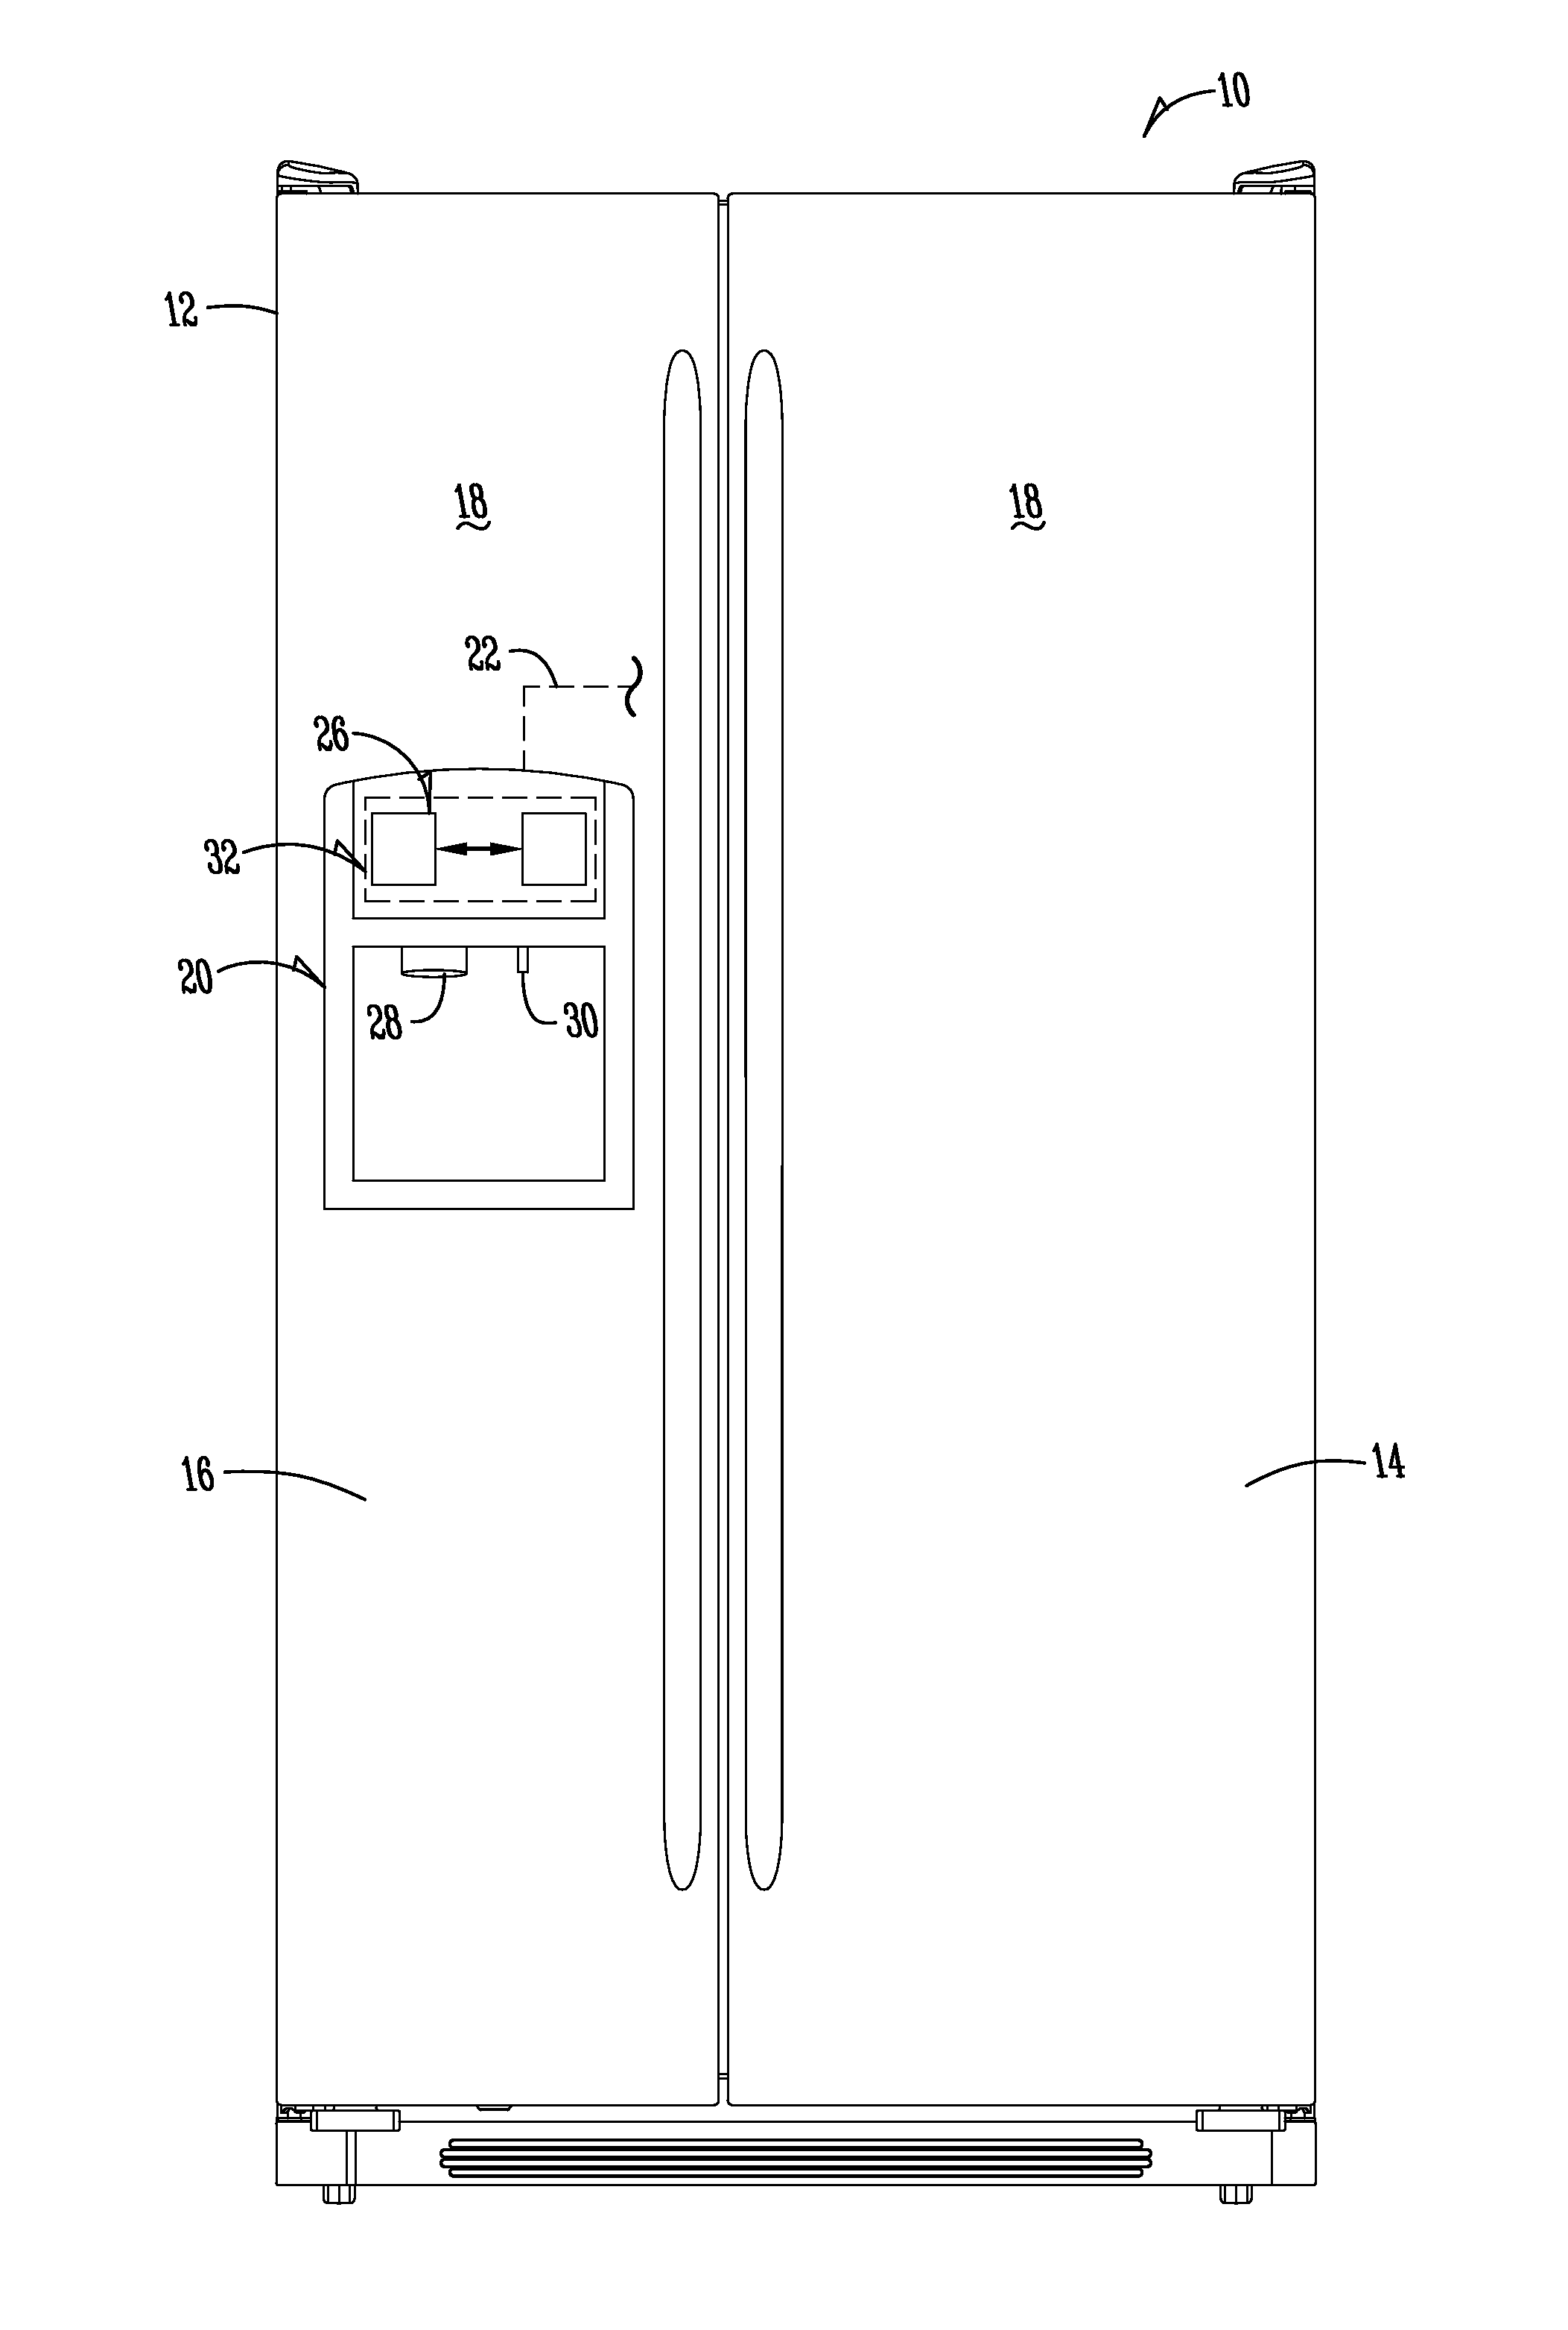 Apparatus, method and system for managing and dispensing liquid enhancement components from a refrigerator